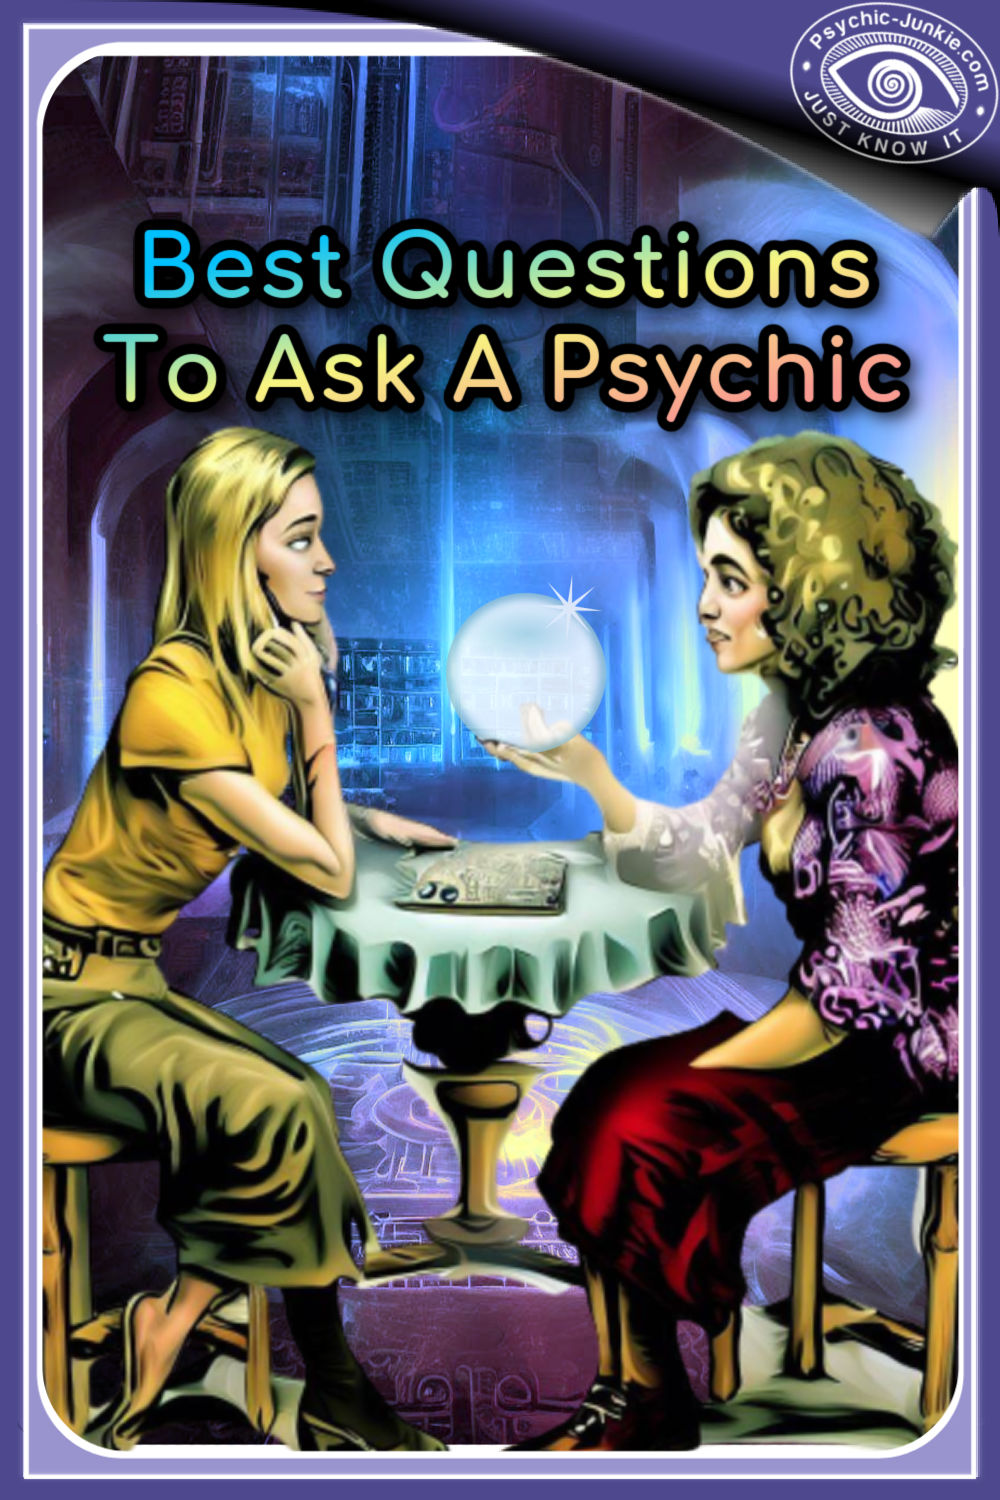 The best questions to ask a psychic will turn any reading from drab to fab!